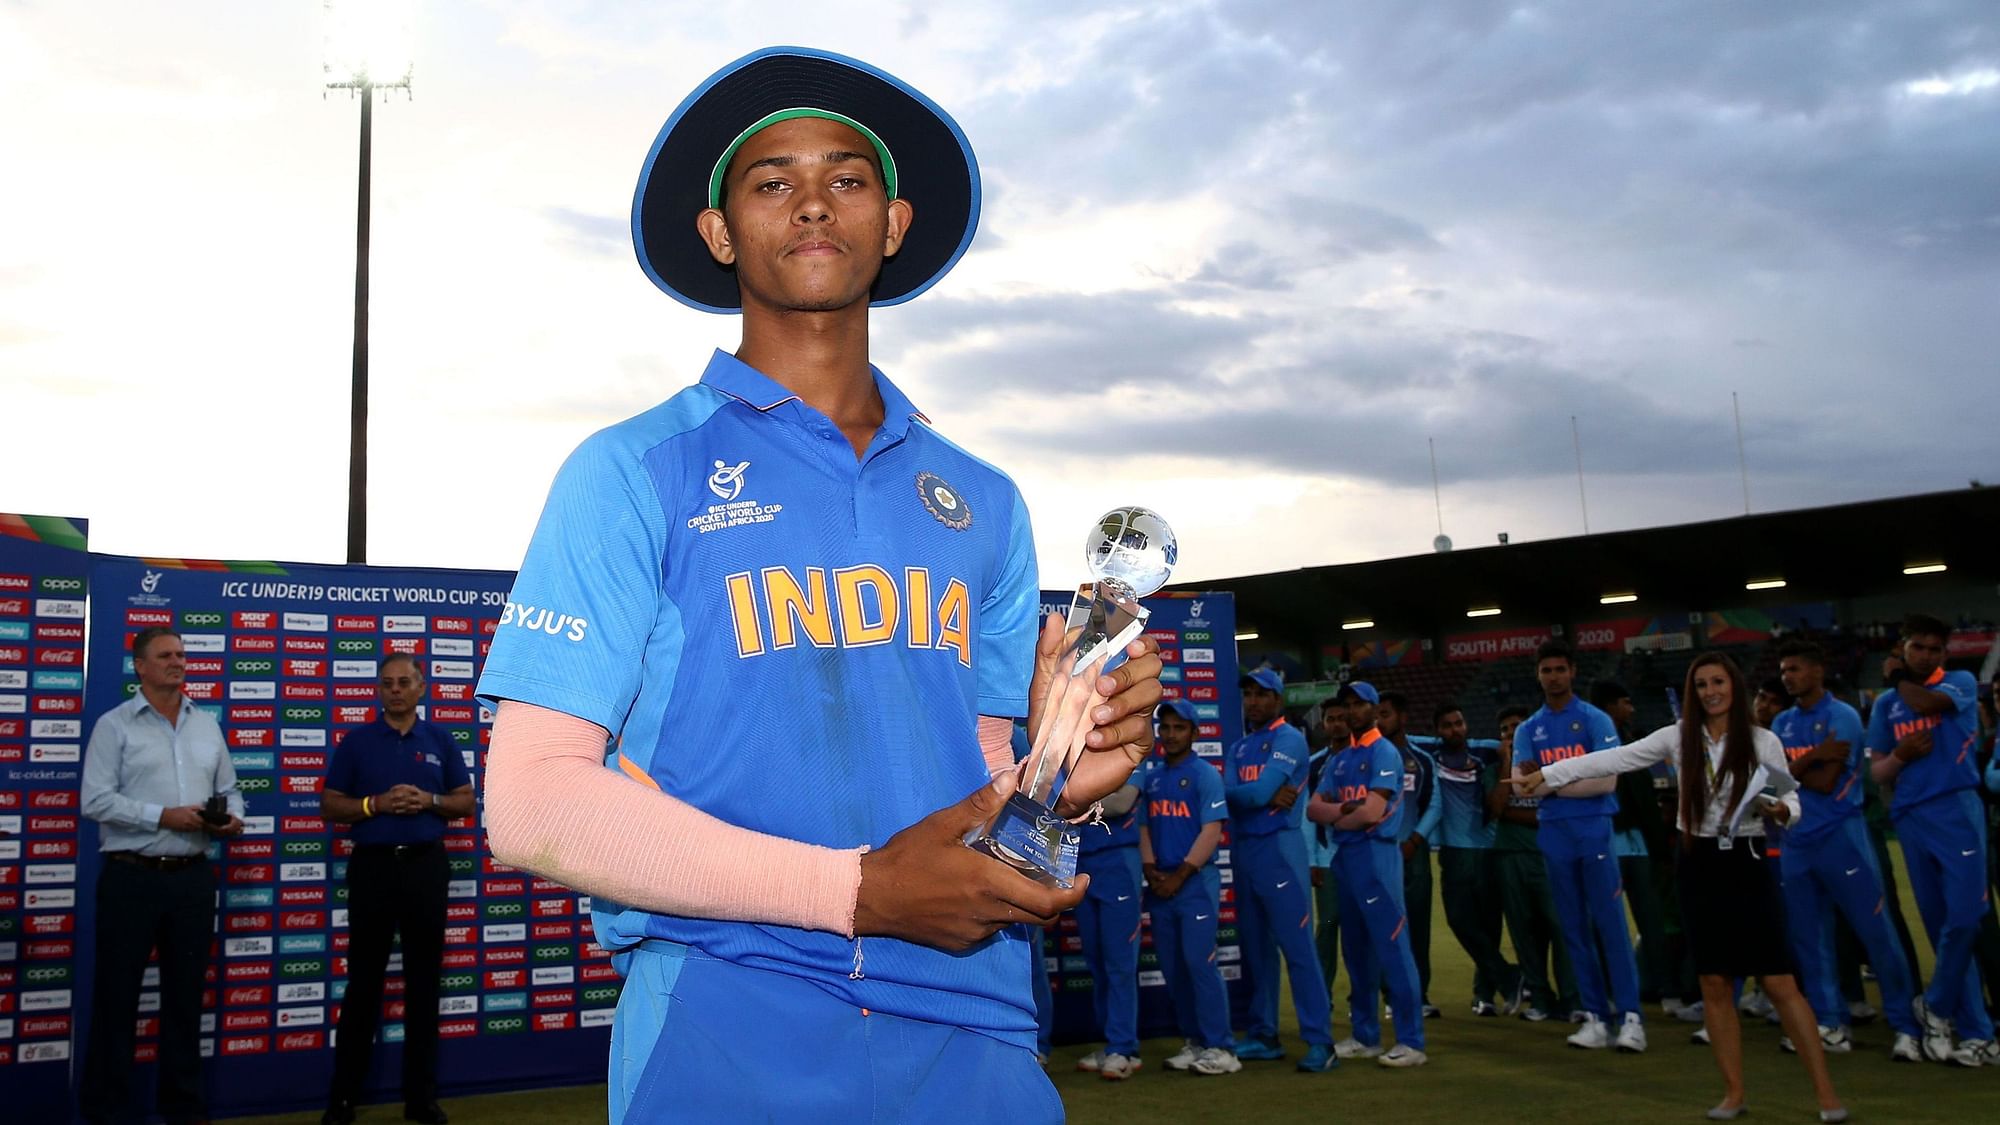 Yashasvi was adjudged Player of the Tournament for the 400 runs he scored from 6 innings in the ICC U-19 World Cup this year.